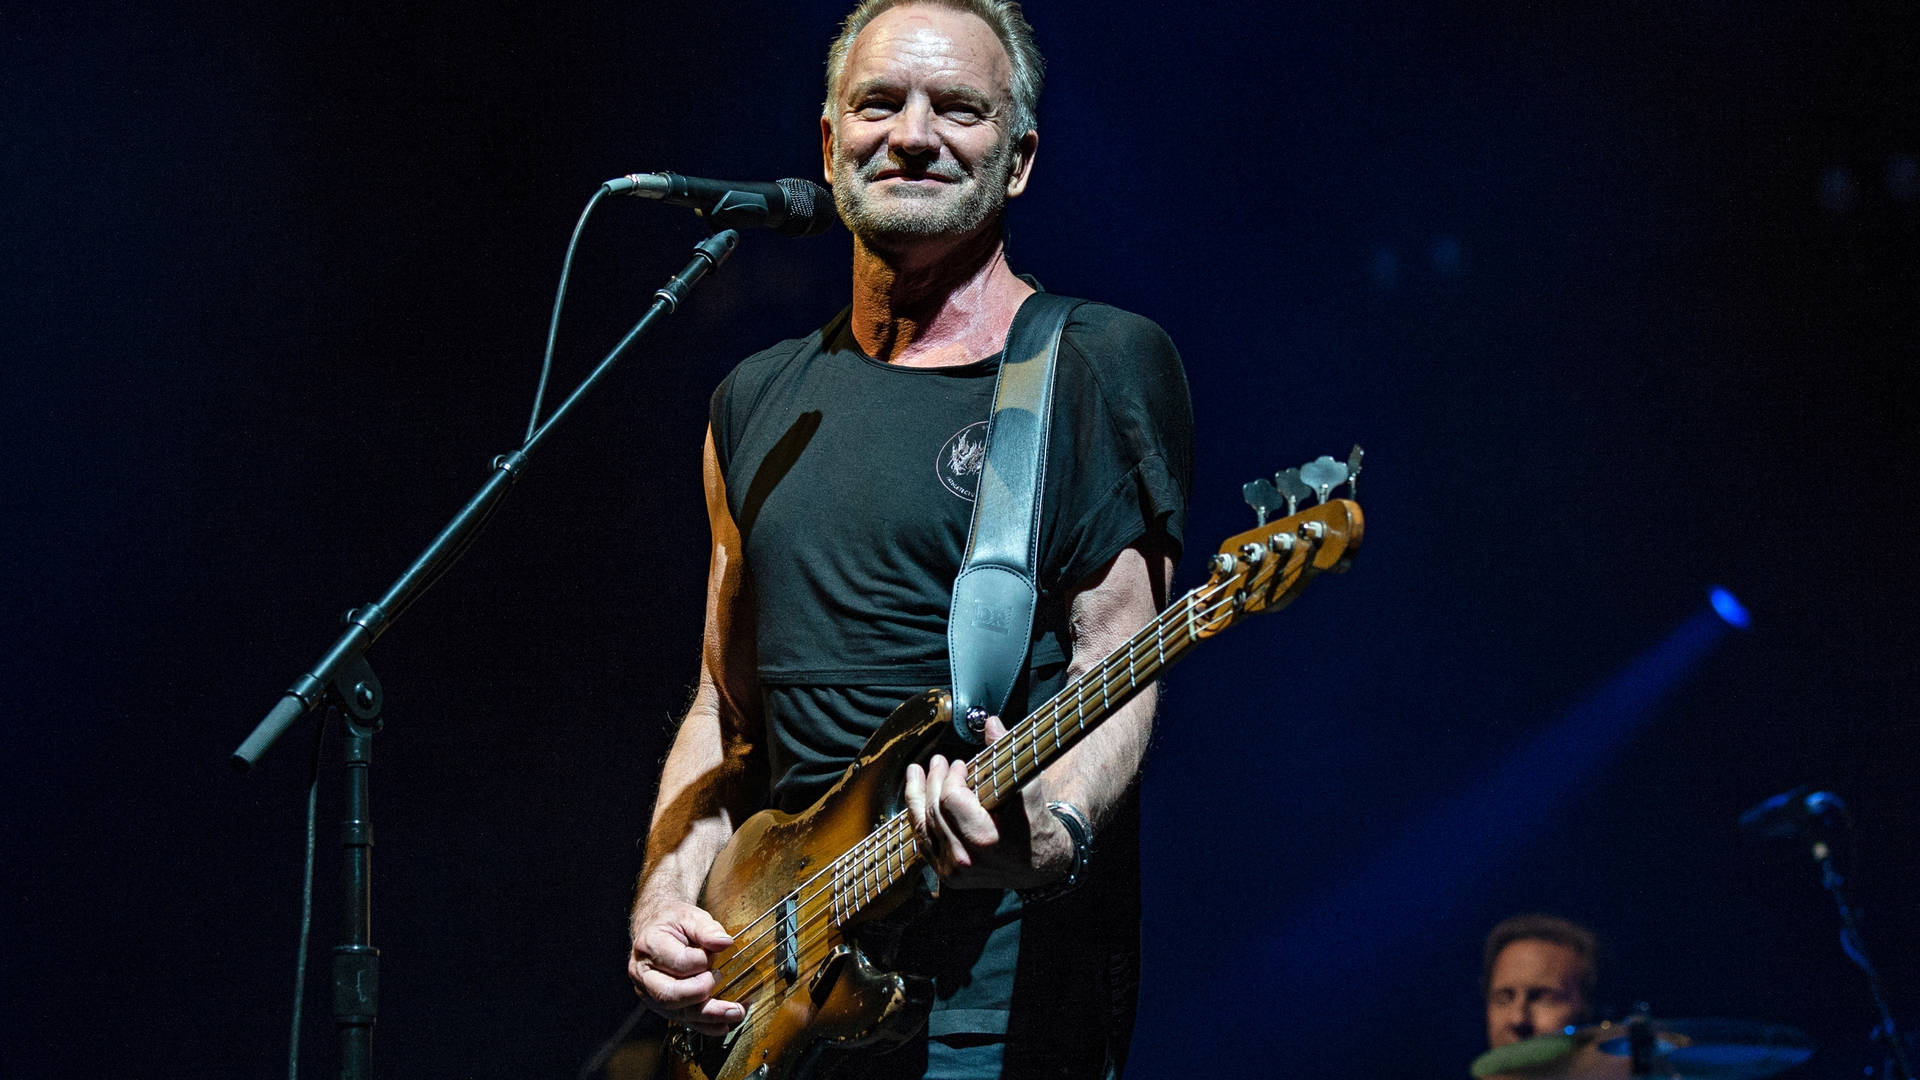 Legendary Musician Sting Wearing a Radiant Smile Wallpaper